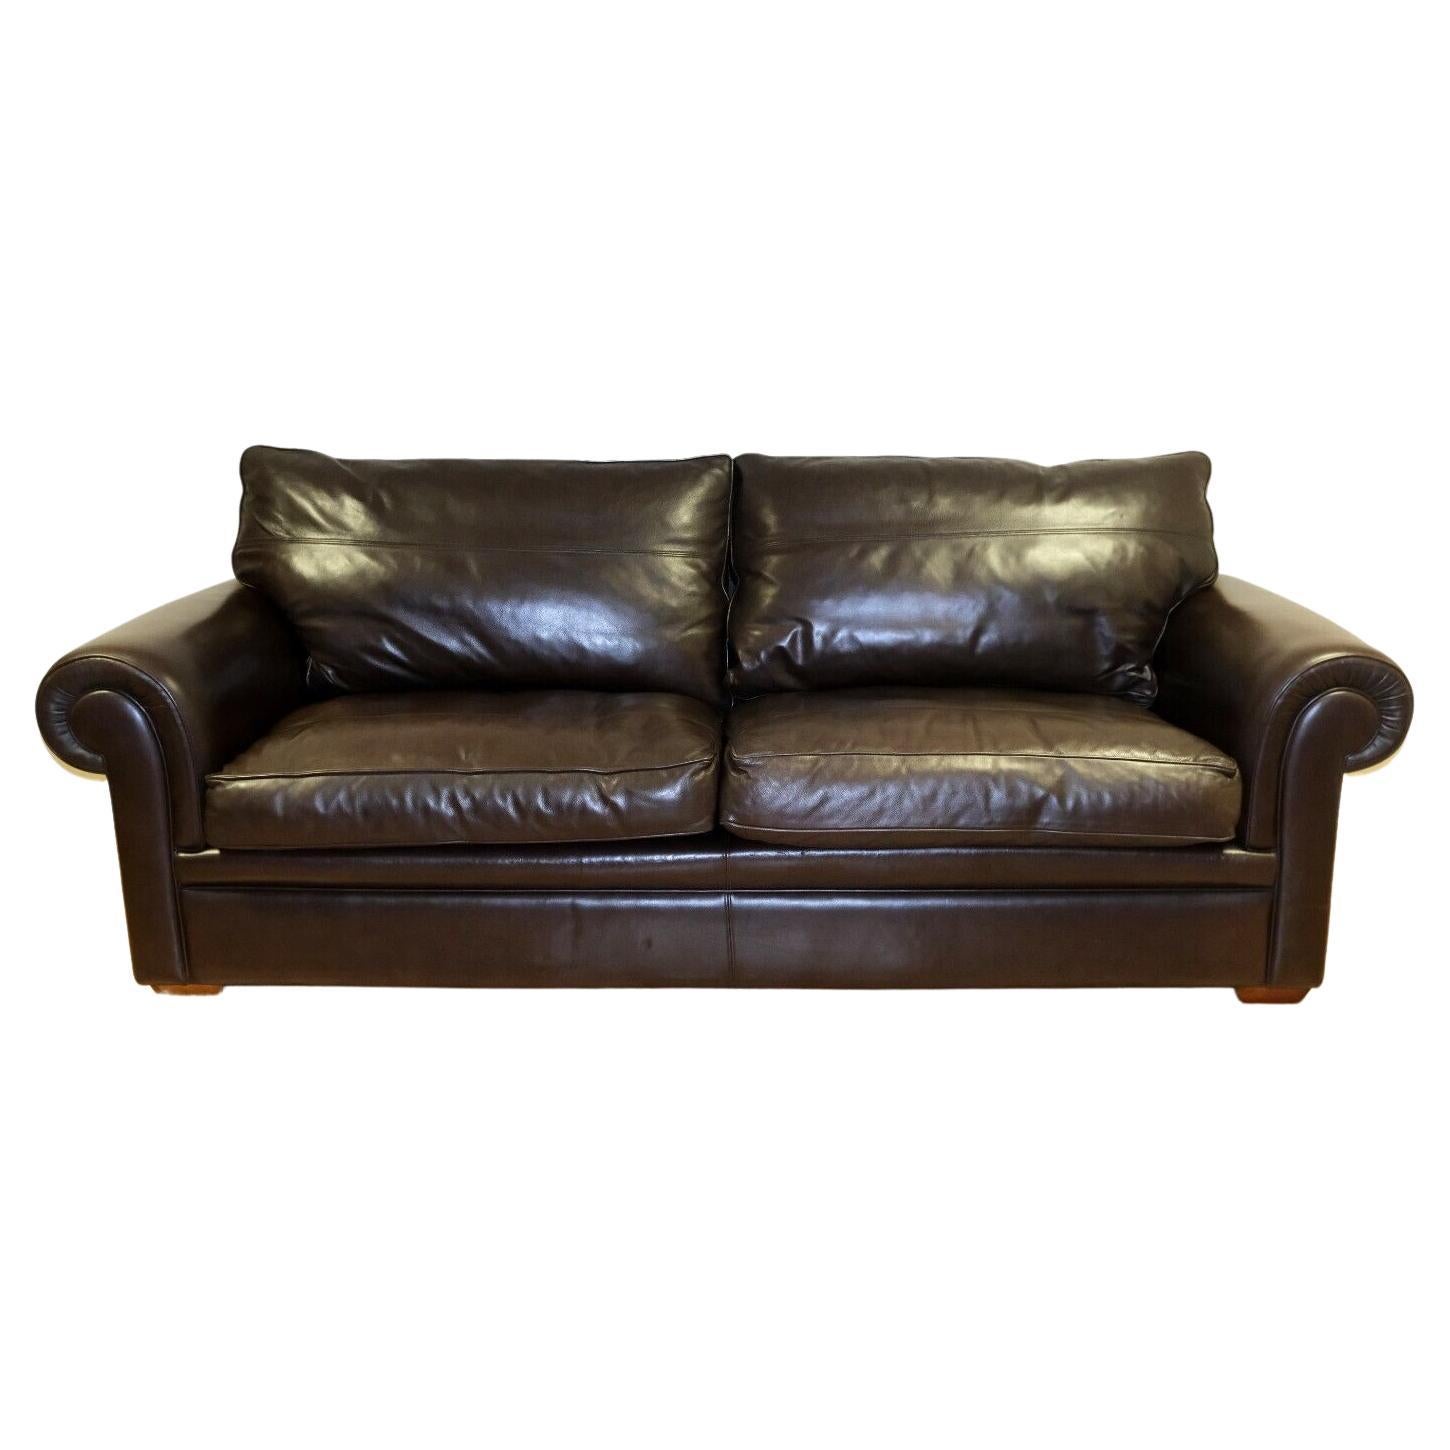 We are delighted to offer for sale this lovely Duresta Garrick dark brown leather three seater sofa on scroll arms. 

This elegant and classic style sofa blends contemporary with traditional design. The soft leather with its wide, comfortable